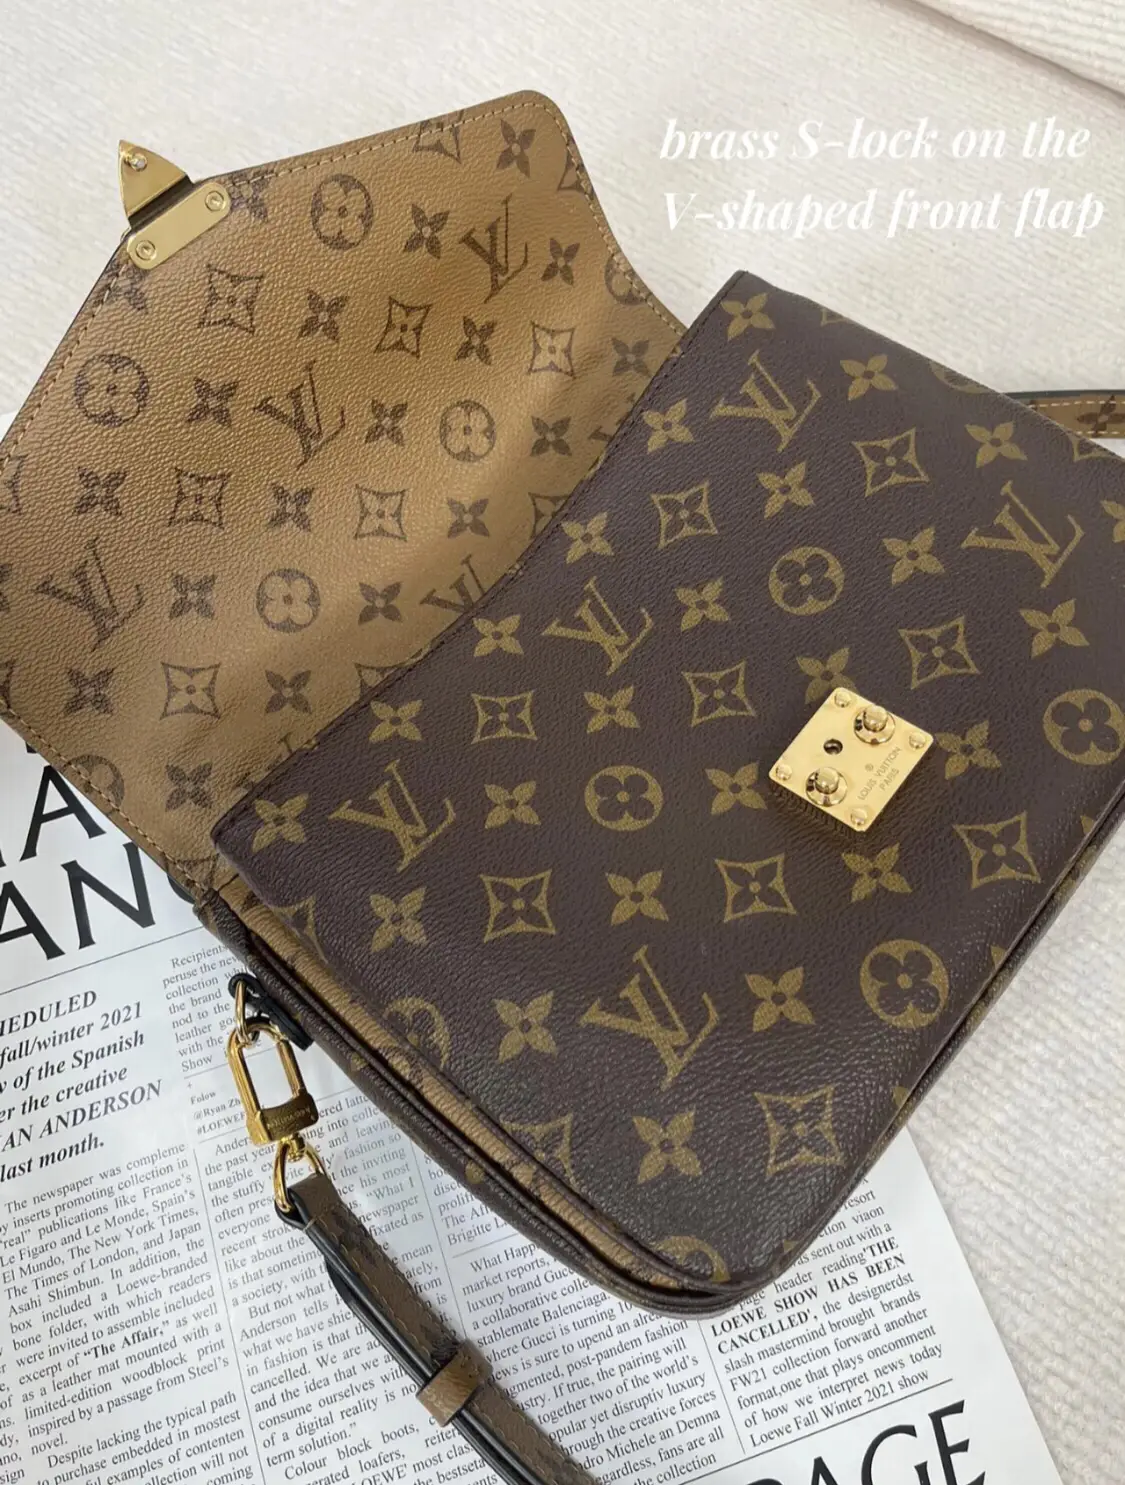 louis vuitton pochette metis cross body bag and over the knee boots